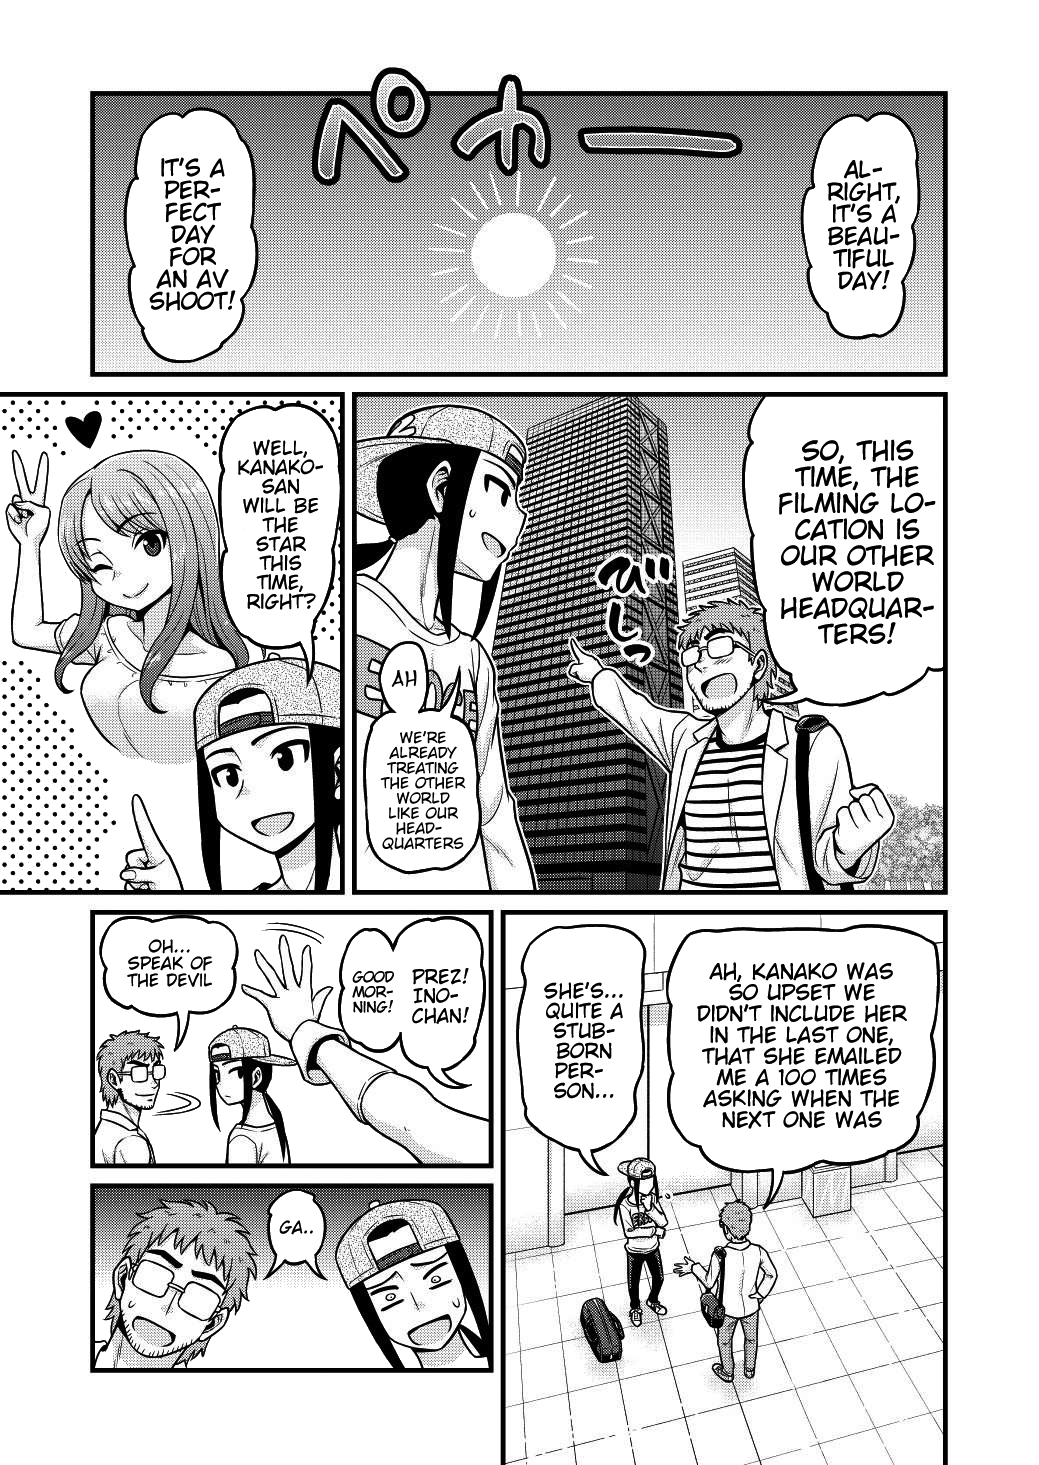 Filming Adult Videos in Another World - Chapter 3 Page 2